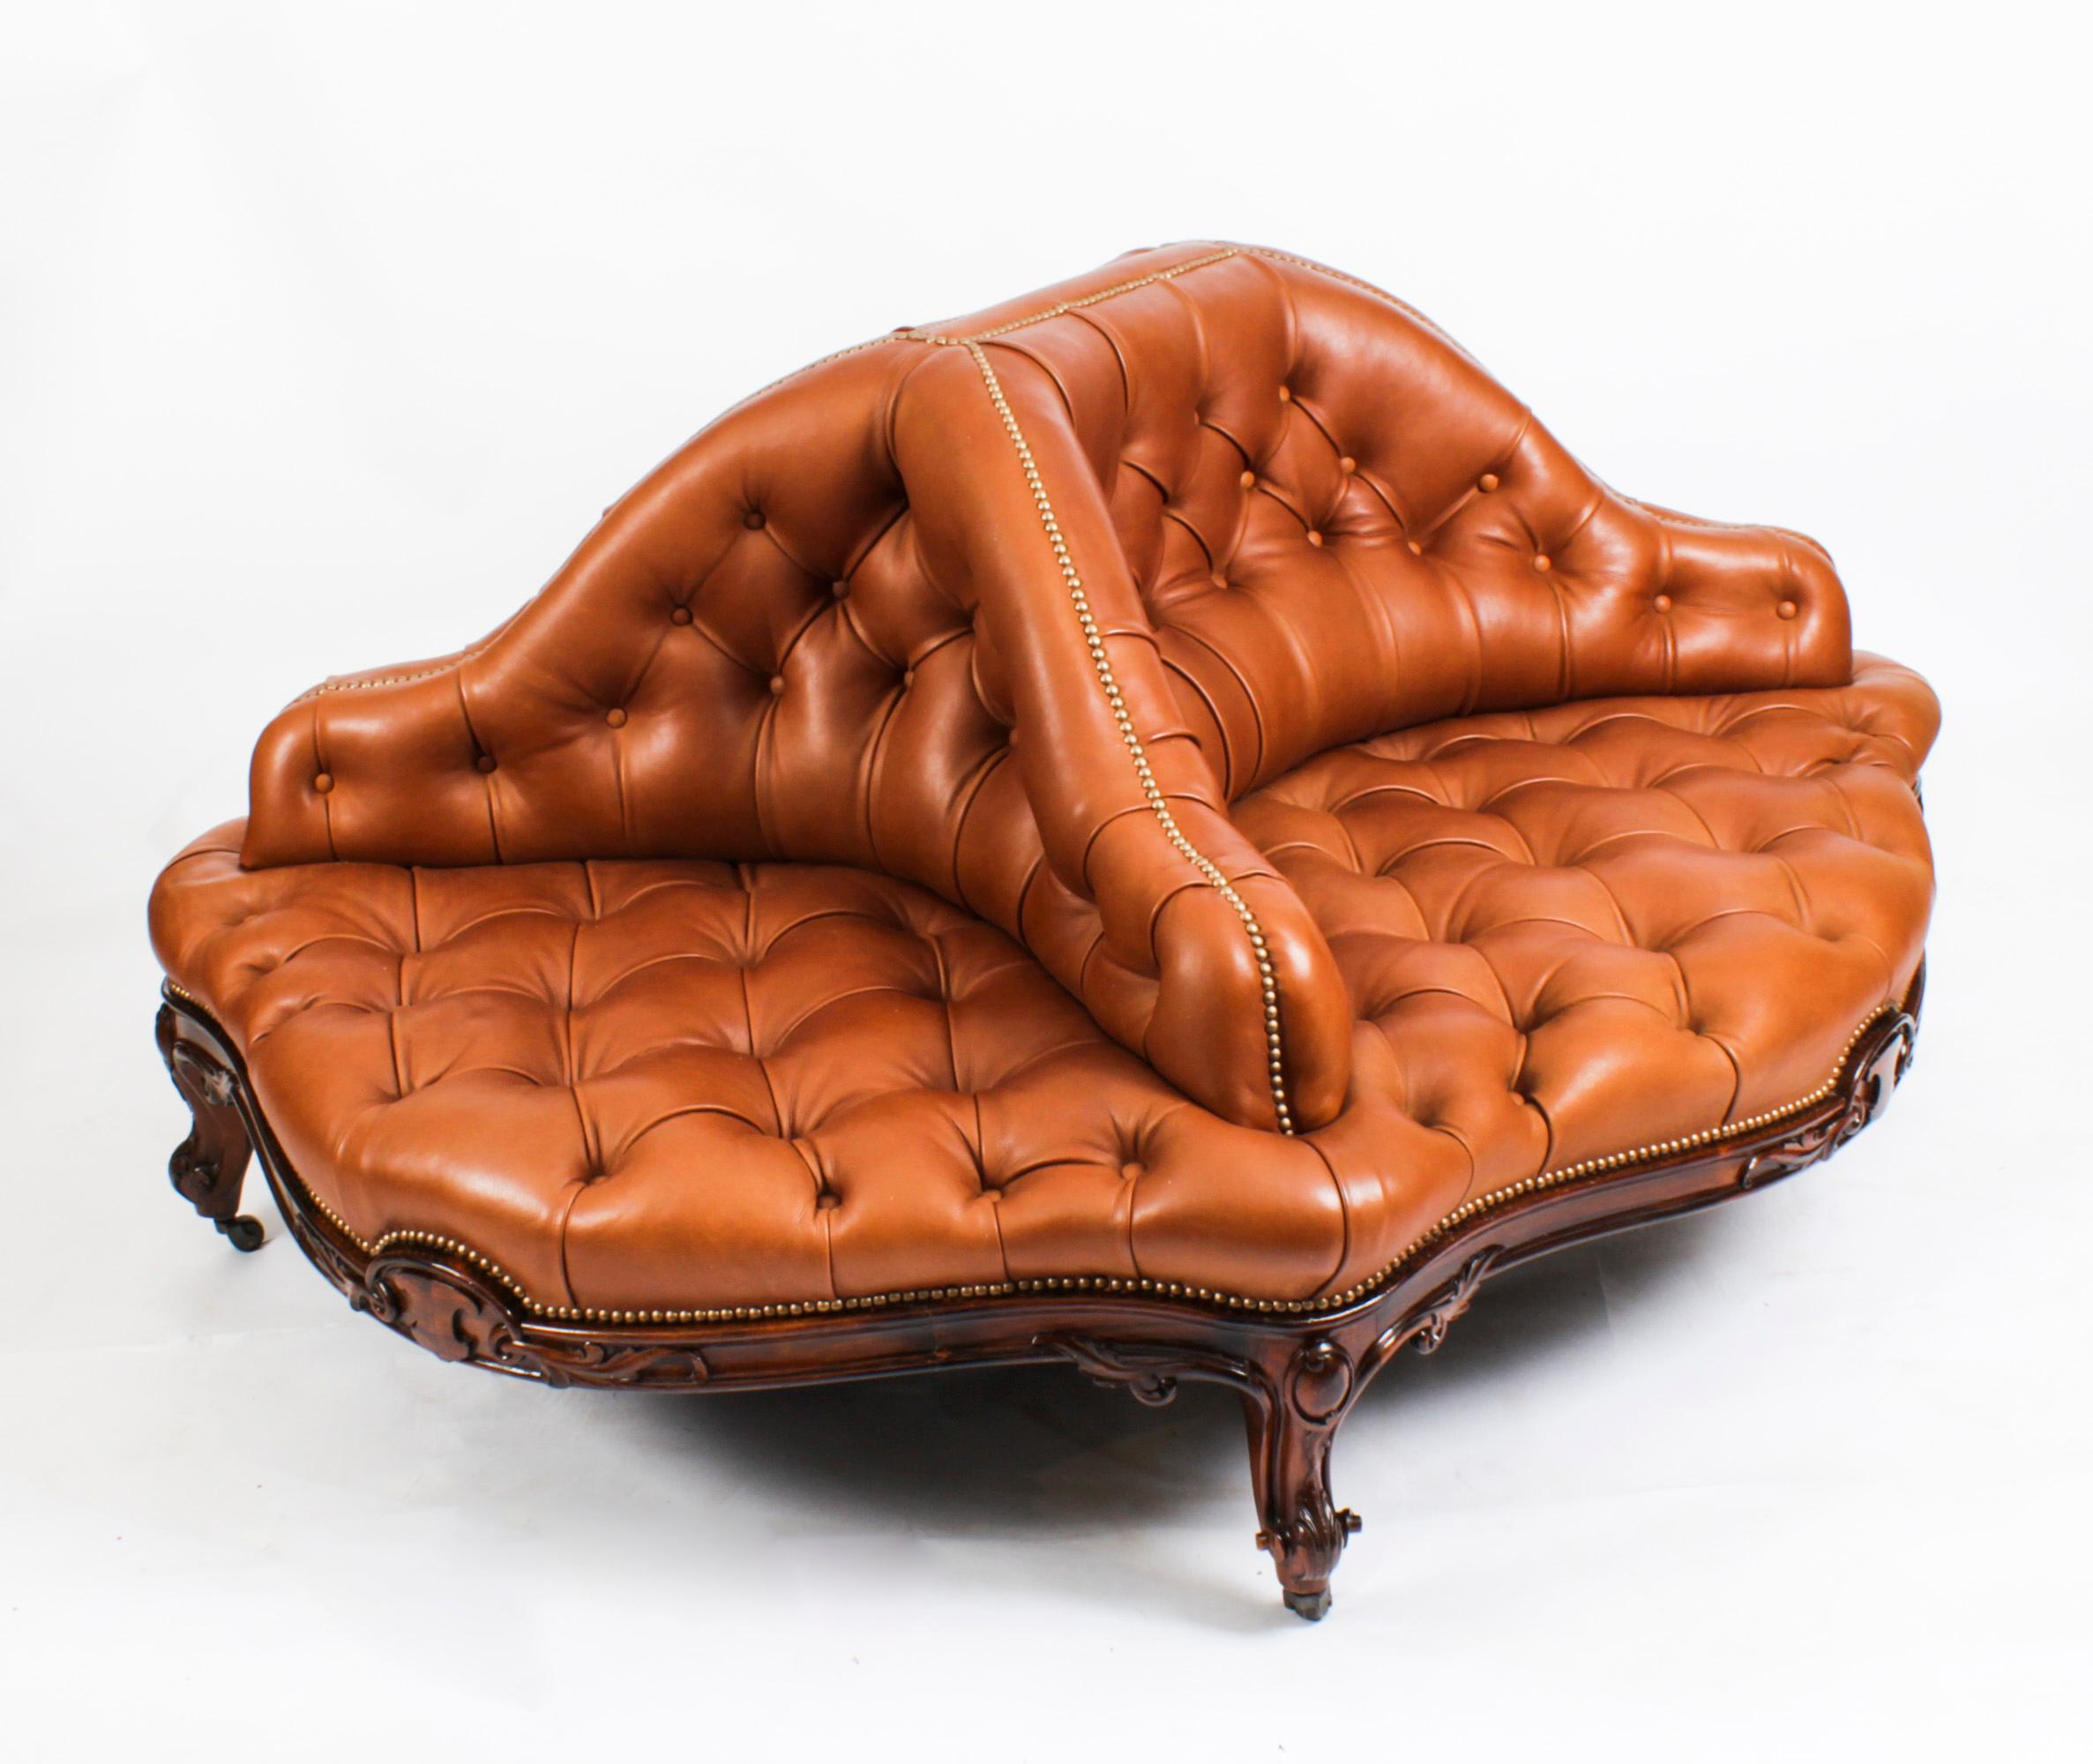 This is a very large fantastic English antique early Victorian walnut and leather framed conversation seat, also known as a 